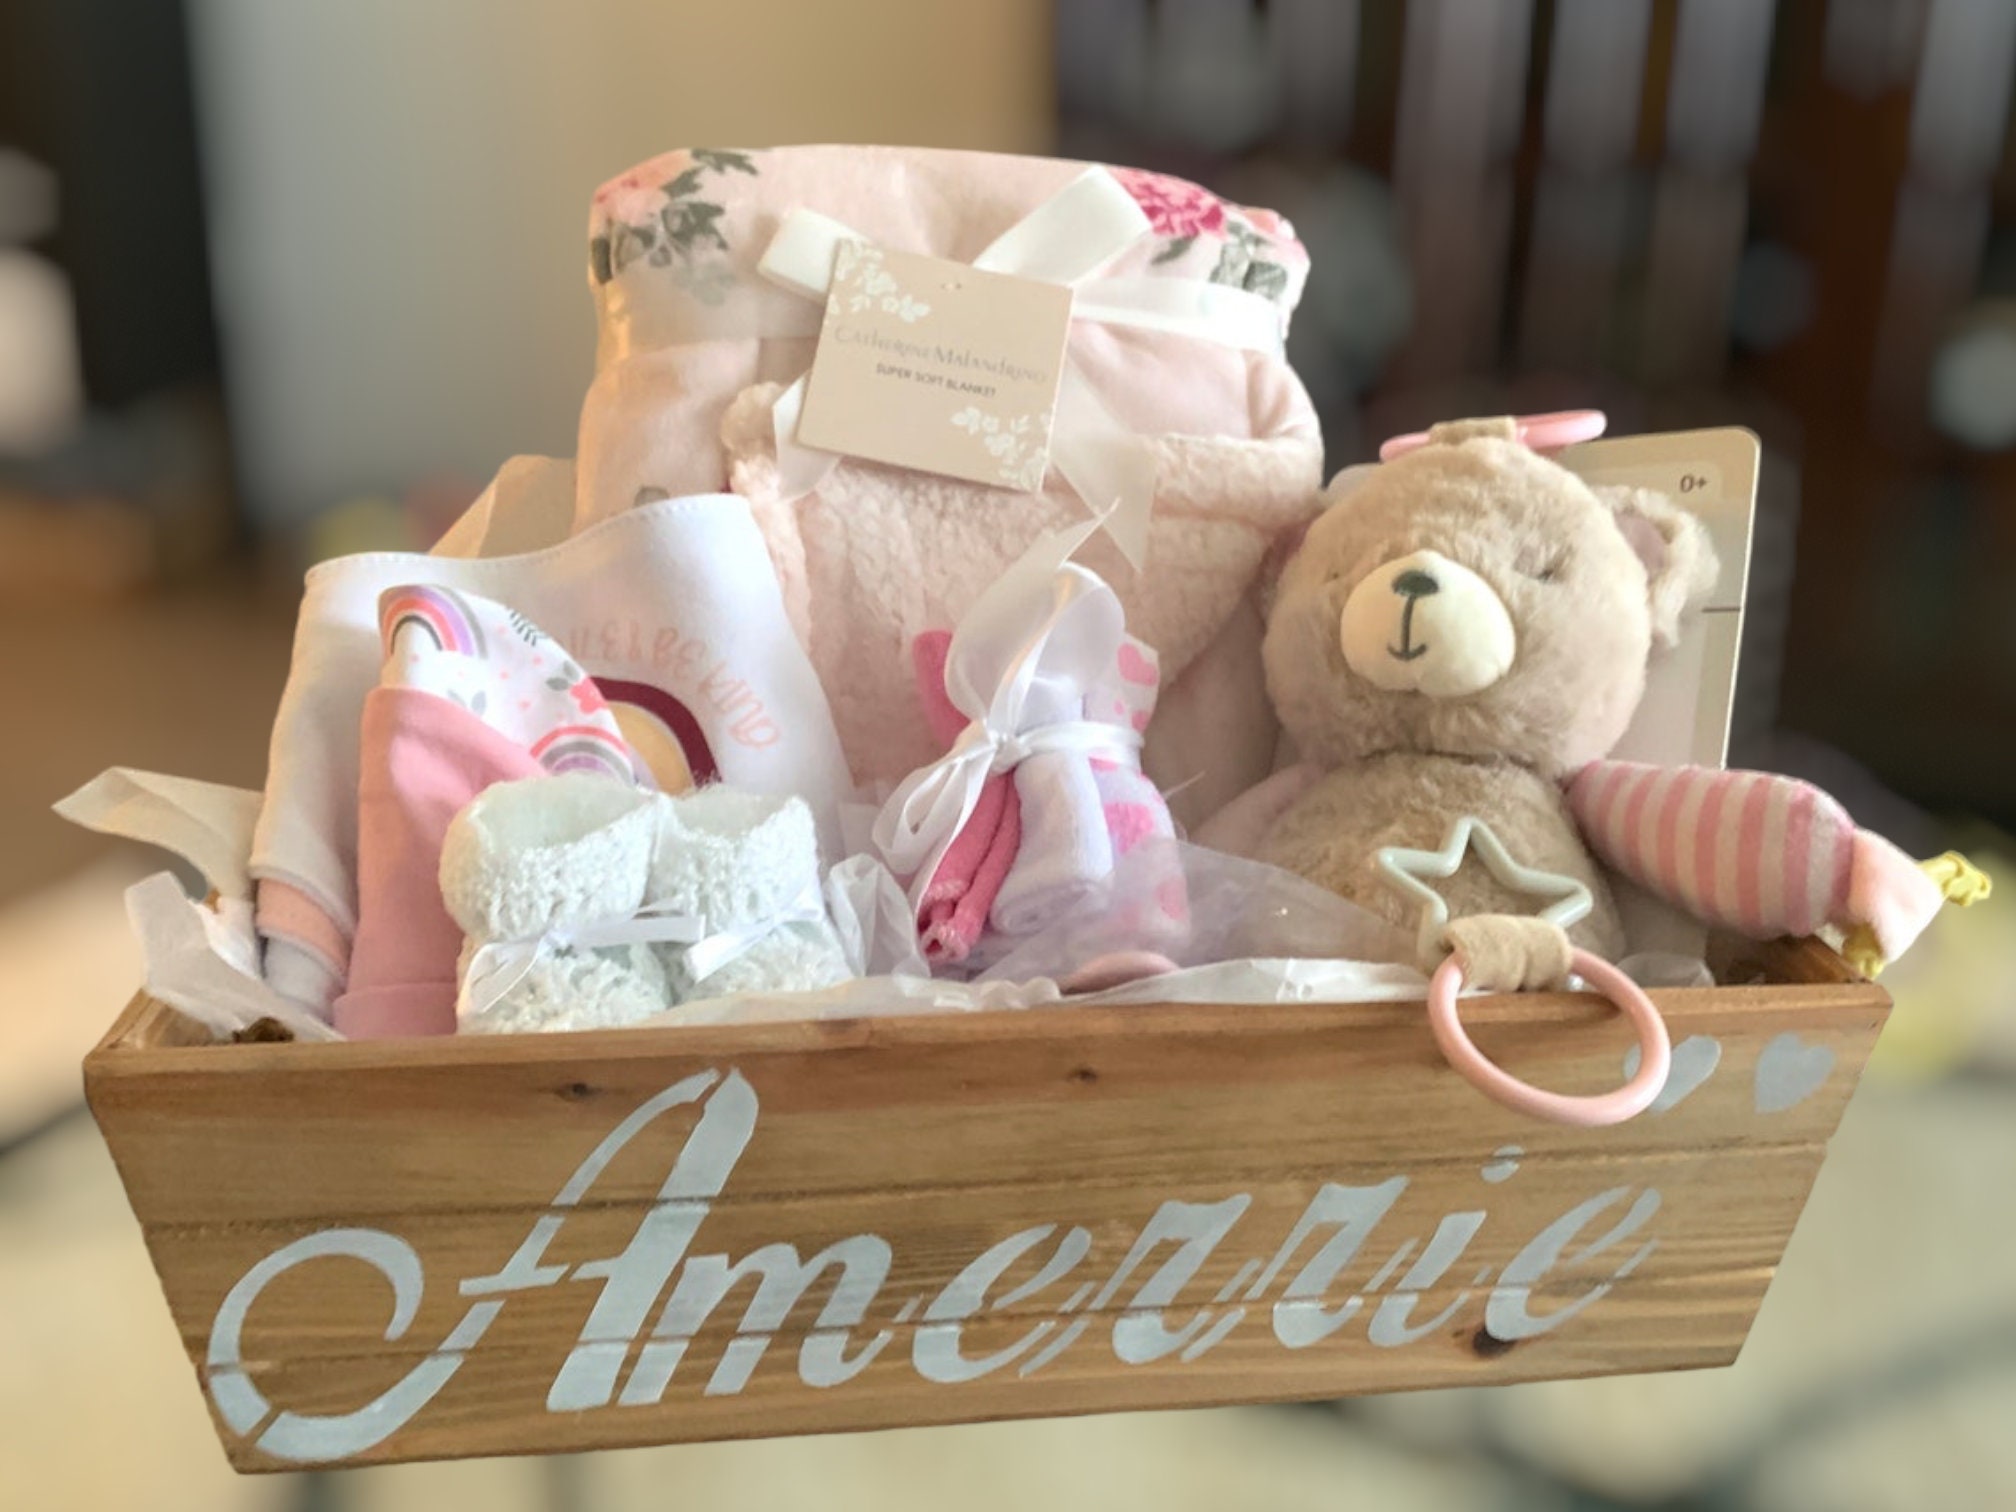 Baby Box Shop Baby Shower Gifts Girl - 7 Baby Essentials, Gifts for Newborn  Baby Girl - Welcome Baby Girl Gift Basket, Baby Girl Gift Set - Gift for